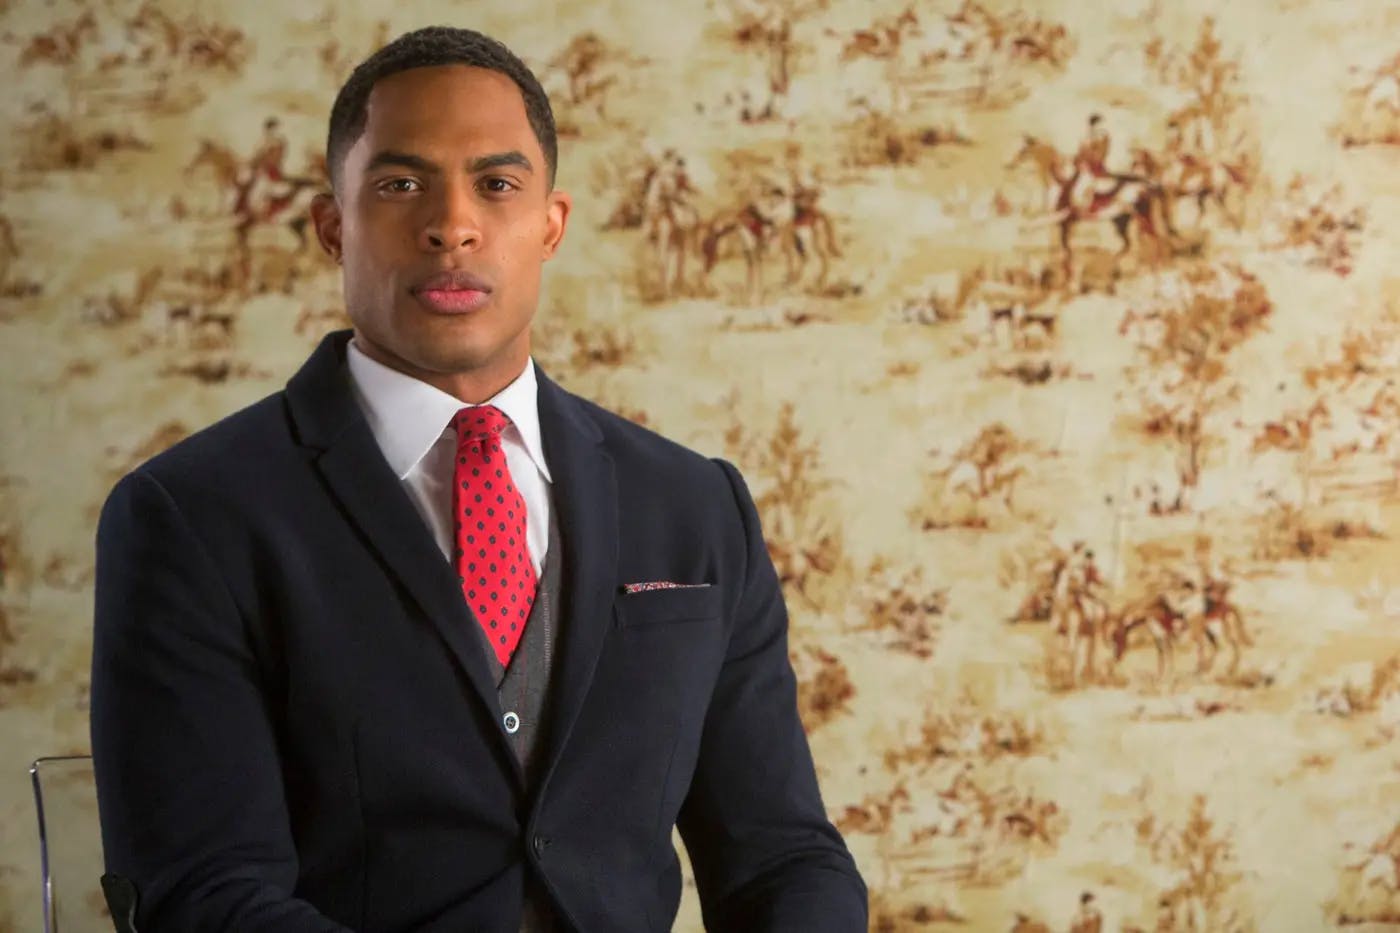 Troy Fairbanks (Brandon Bell) sits in front of a vintage patterned background of horses & their owners.  He looks confident and serious and is smartly dressed in a navy blue suit, grey waistcoat, a red tie with green dots, and a patterned pocket-handkerchief.